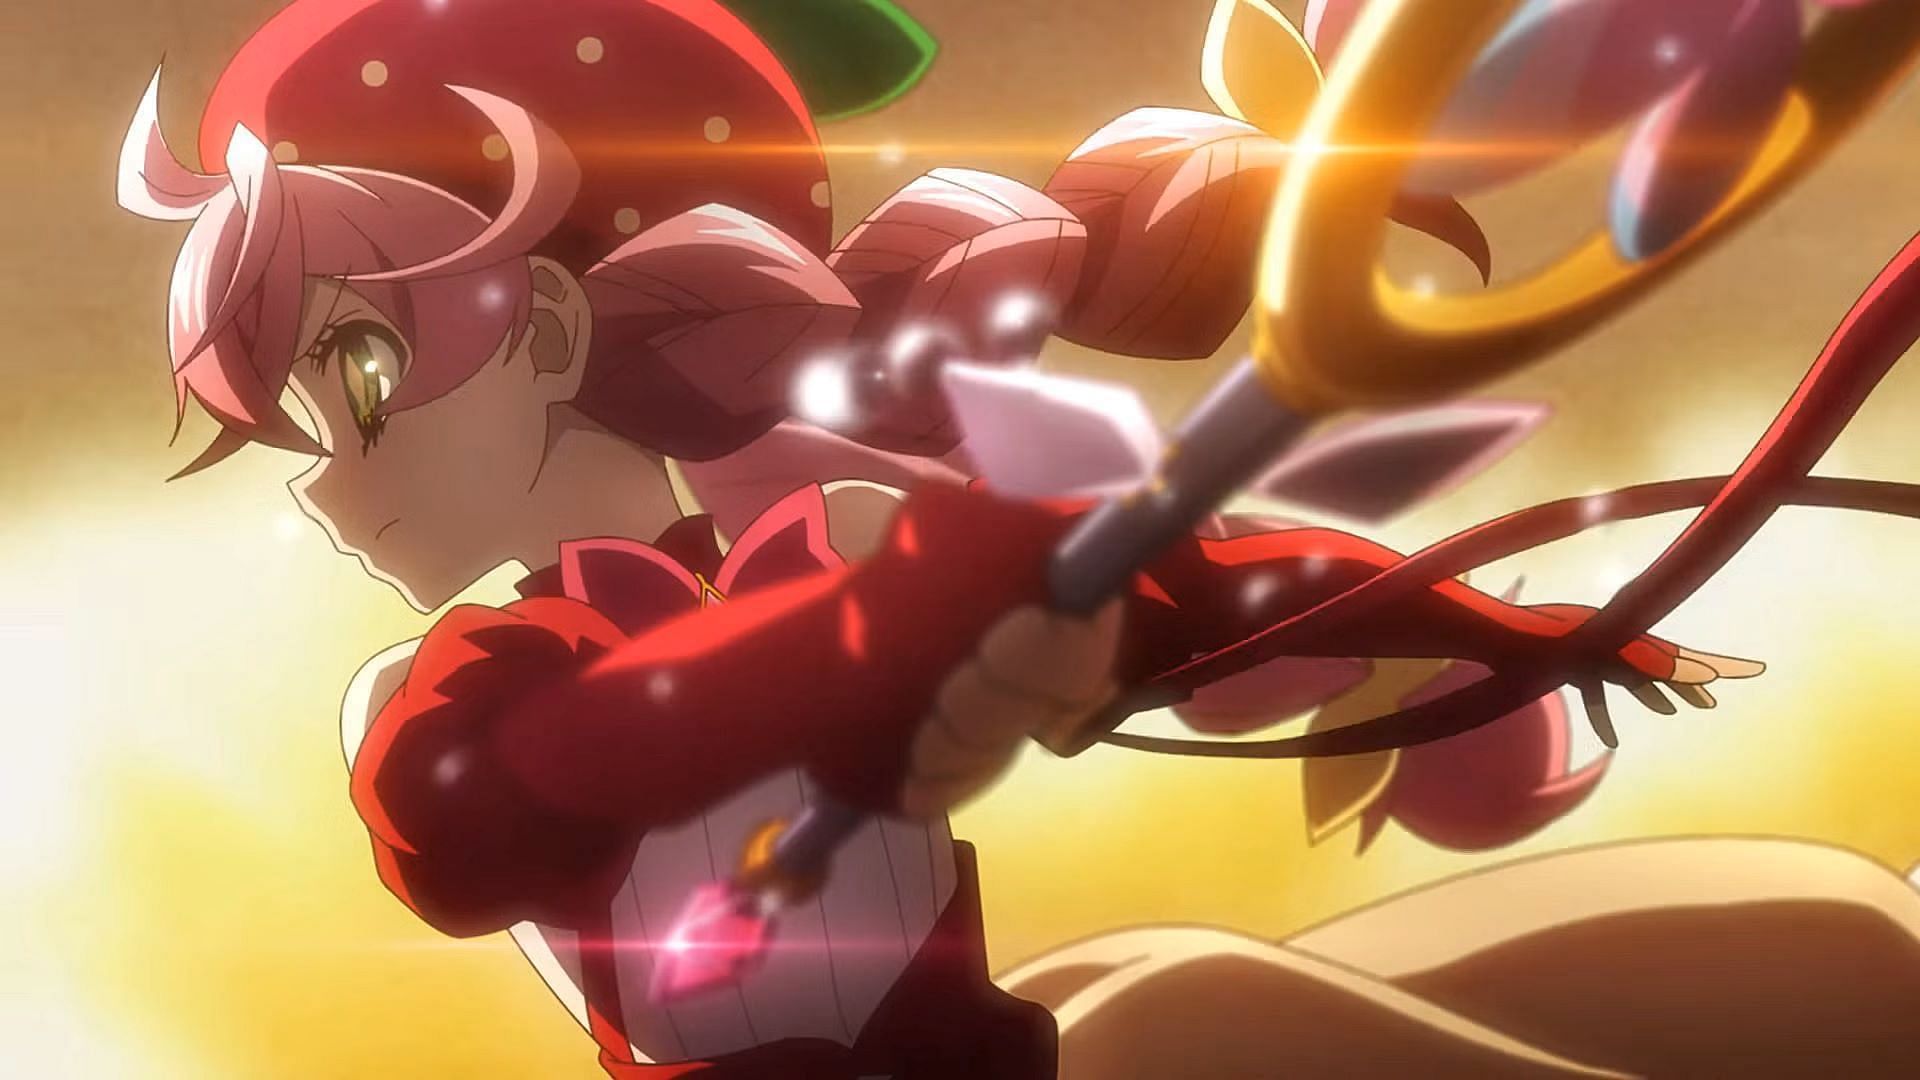 Berry Blossom, as seen in the anime (Image via Voil)